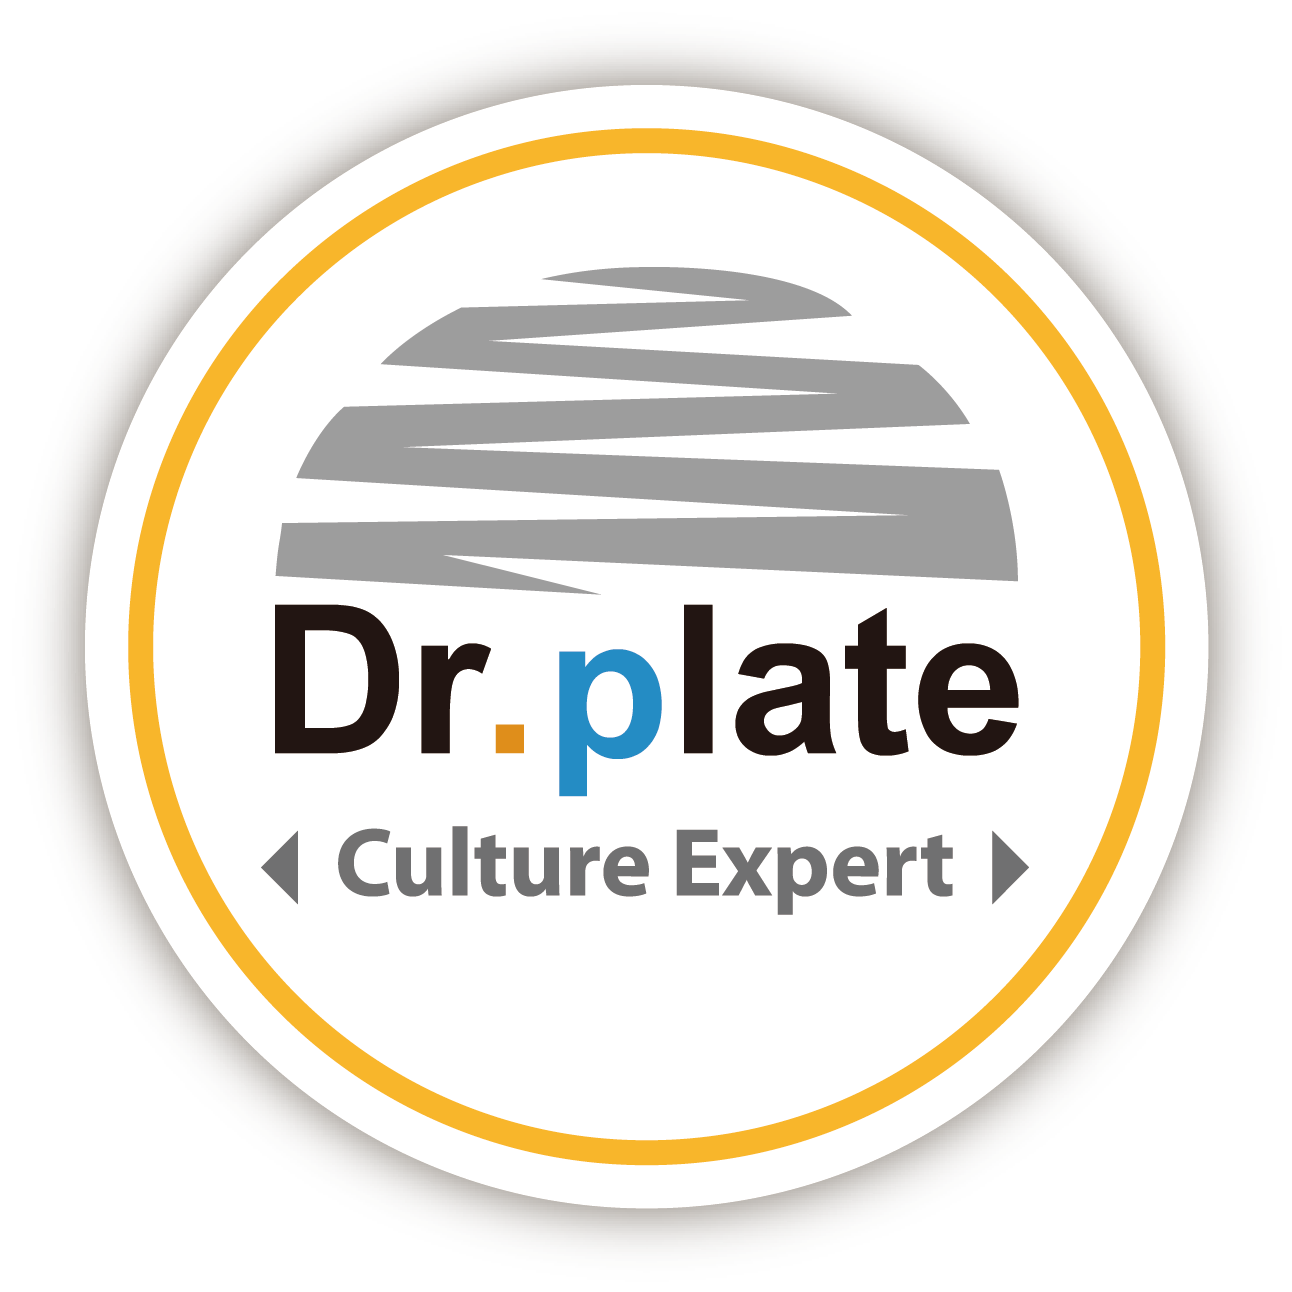 Dr.plate LOGO new 02.png